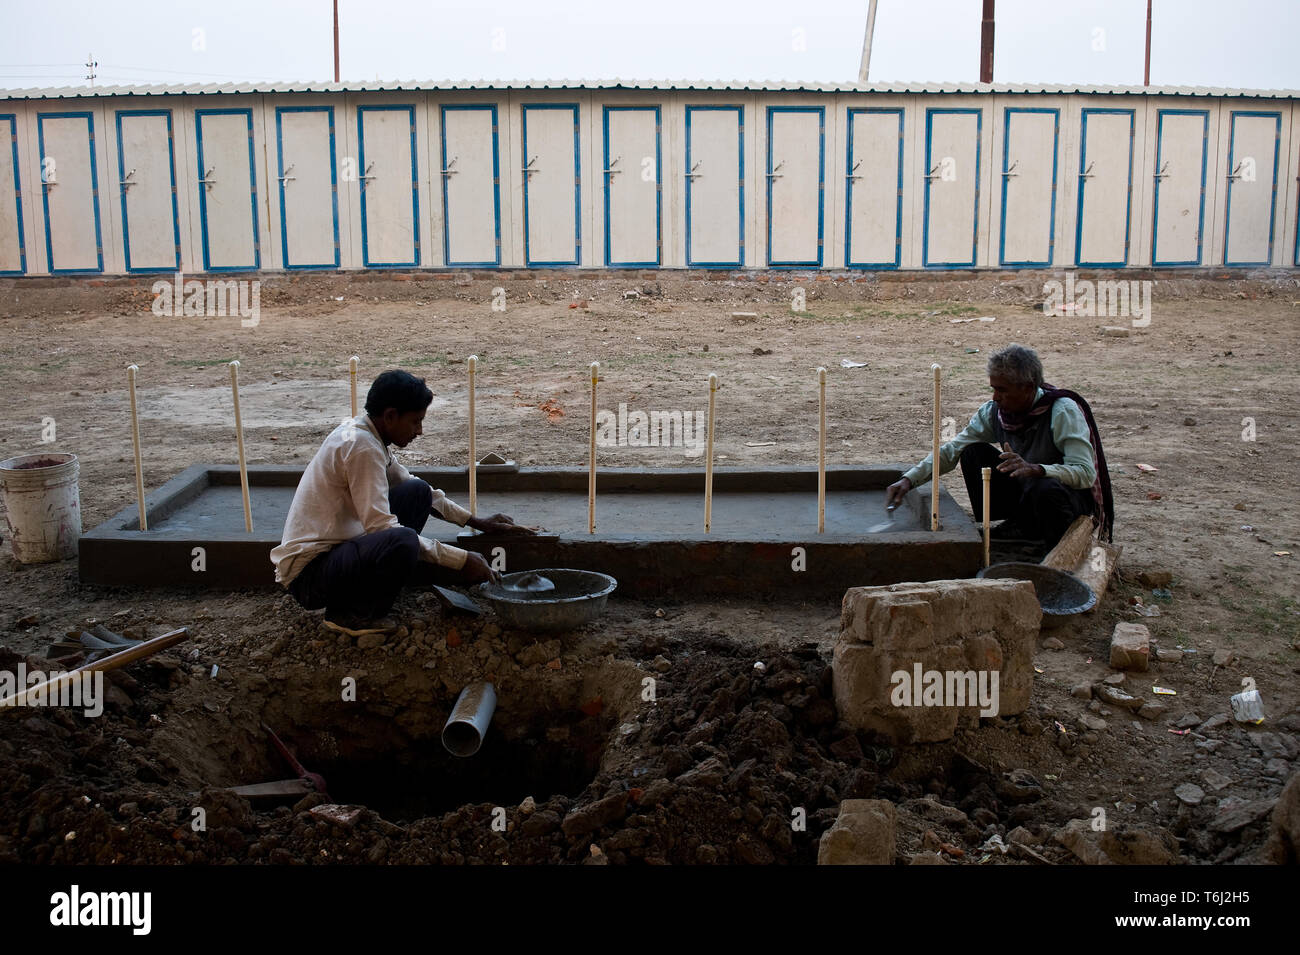 Masons are building sanitary facilities before the beginning of the Kumbh mela ( India) In the background, public toilets are visible. Stock Photo